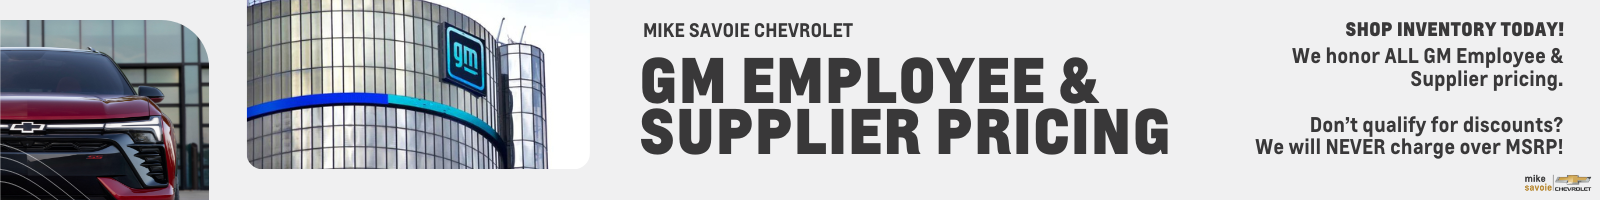 We Honor All GM Employee & Supplier Pricing.Don't Qualify for Discounts?We Will NEVER Charge Over MSRP.Shop Inventory today!